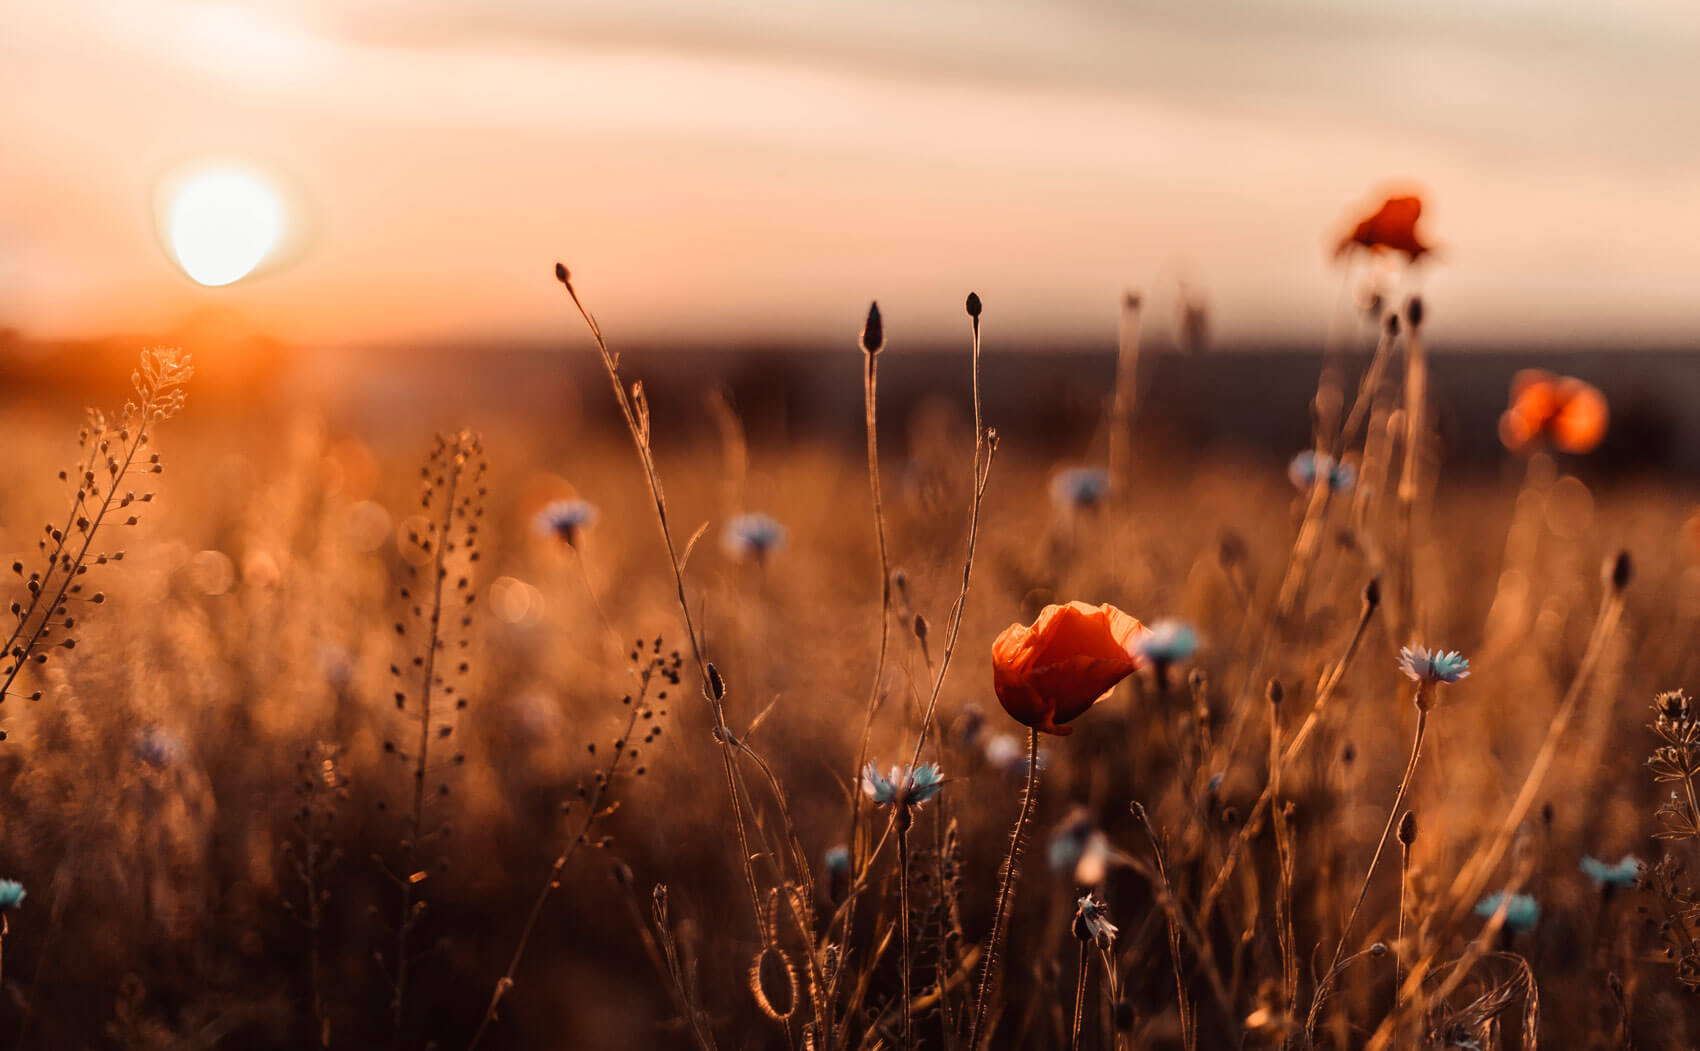 flowers on a field with the sun in the background